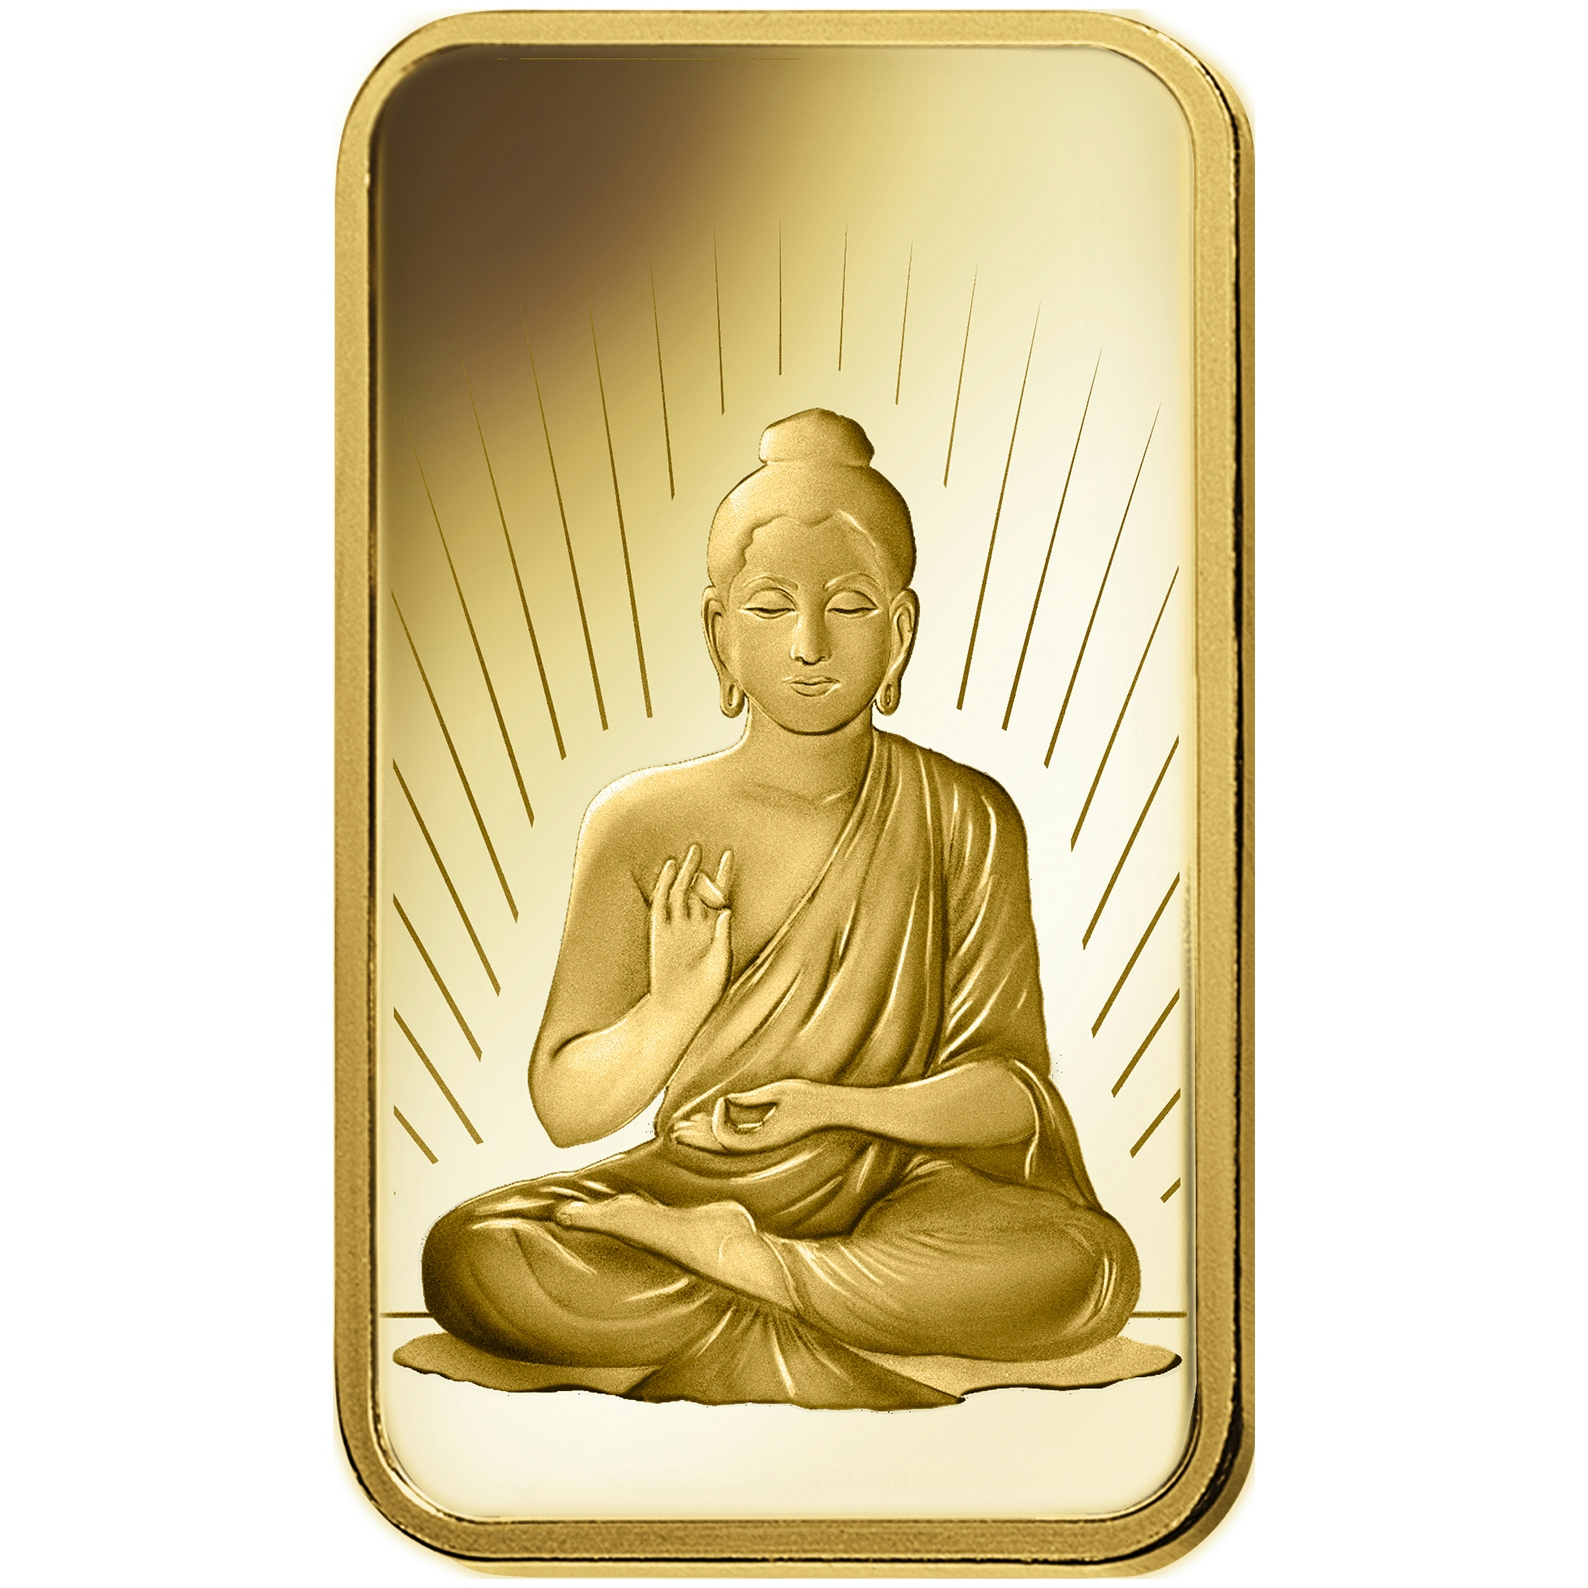 Achat d'or, 1 oz d'or pur Buddha - PAMP Suisse - Front 